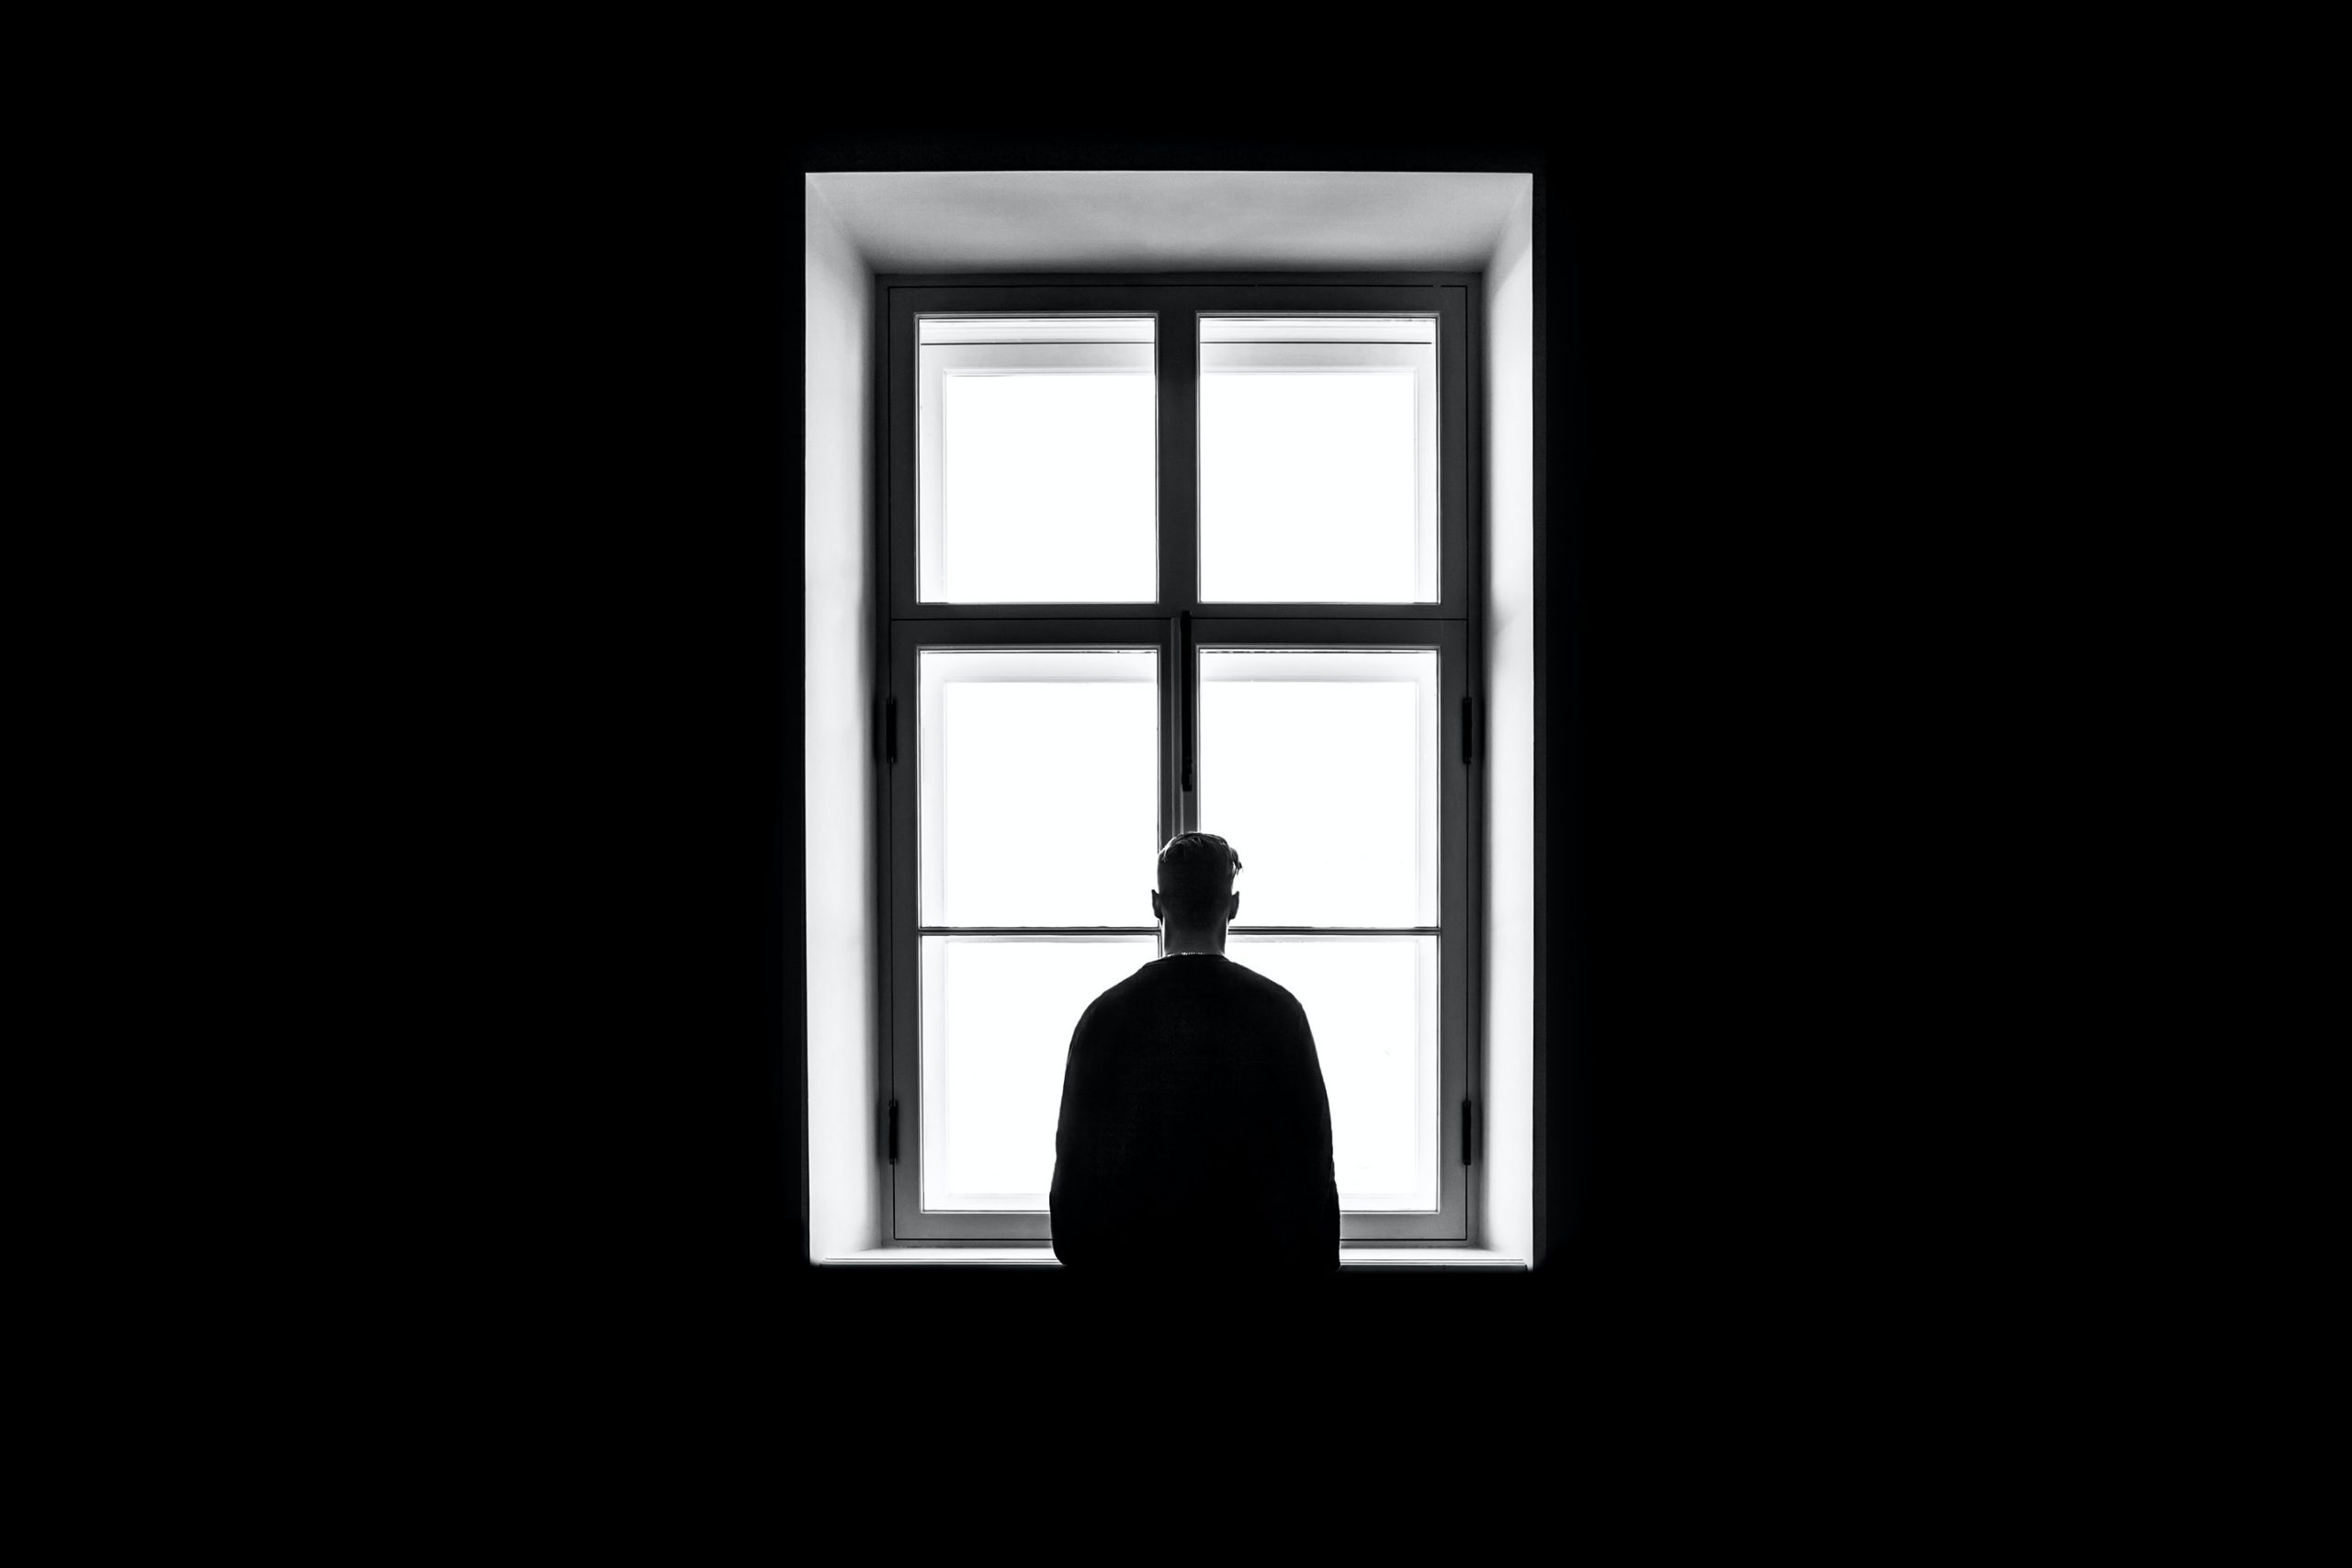 Isolated worker stares out of window alone